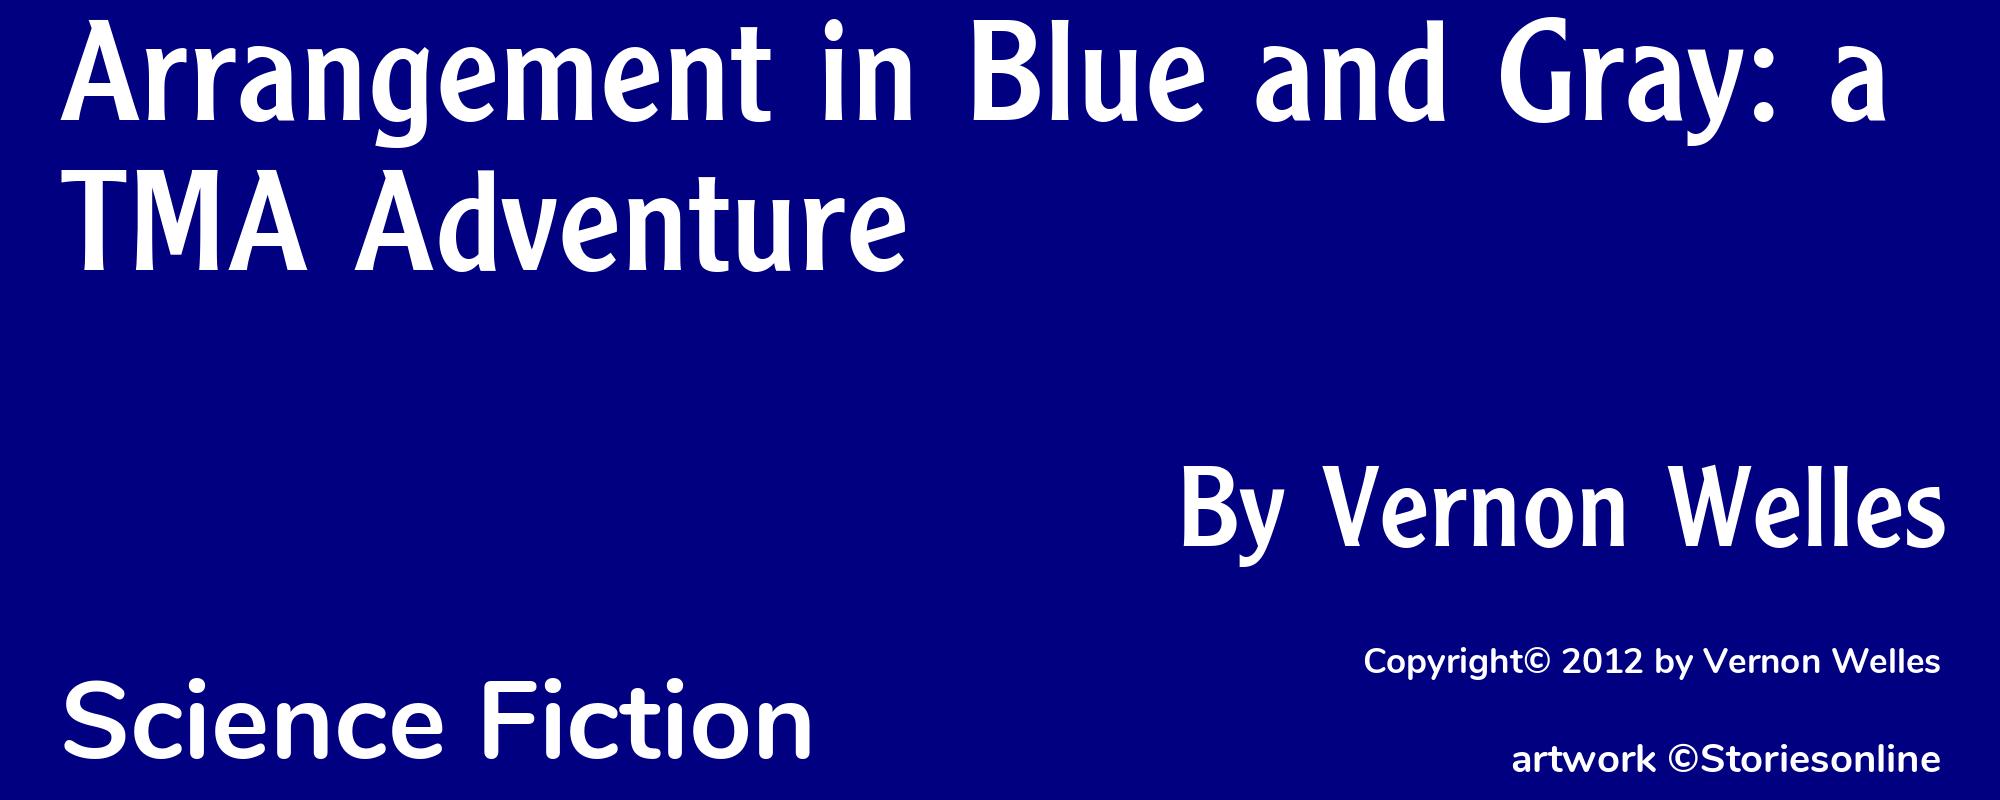 Arrangement in Blue and Gray: a TMA Adventure - Cover